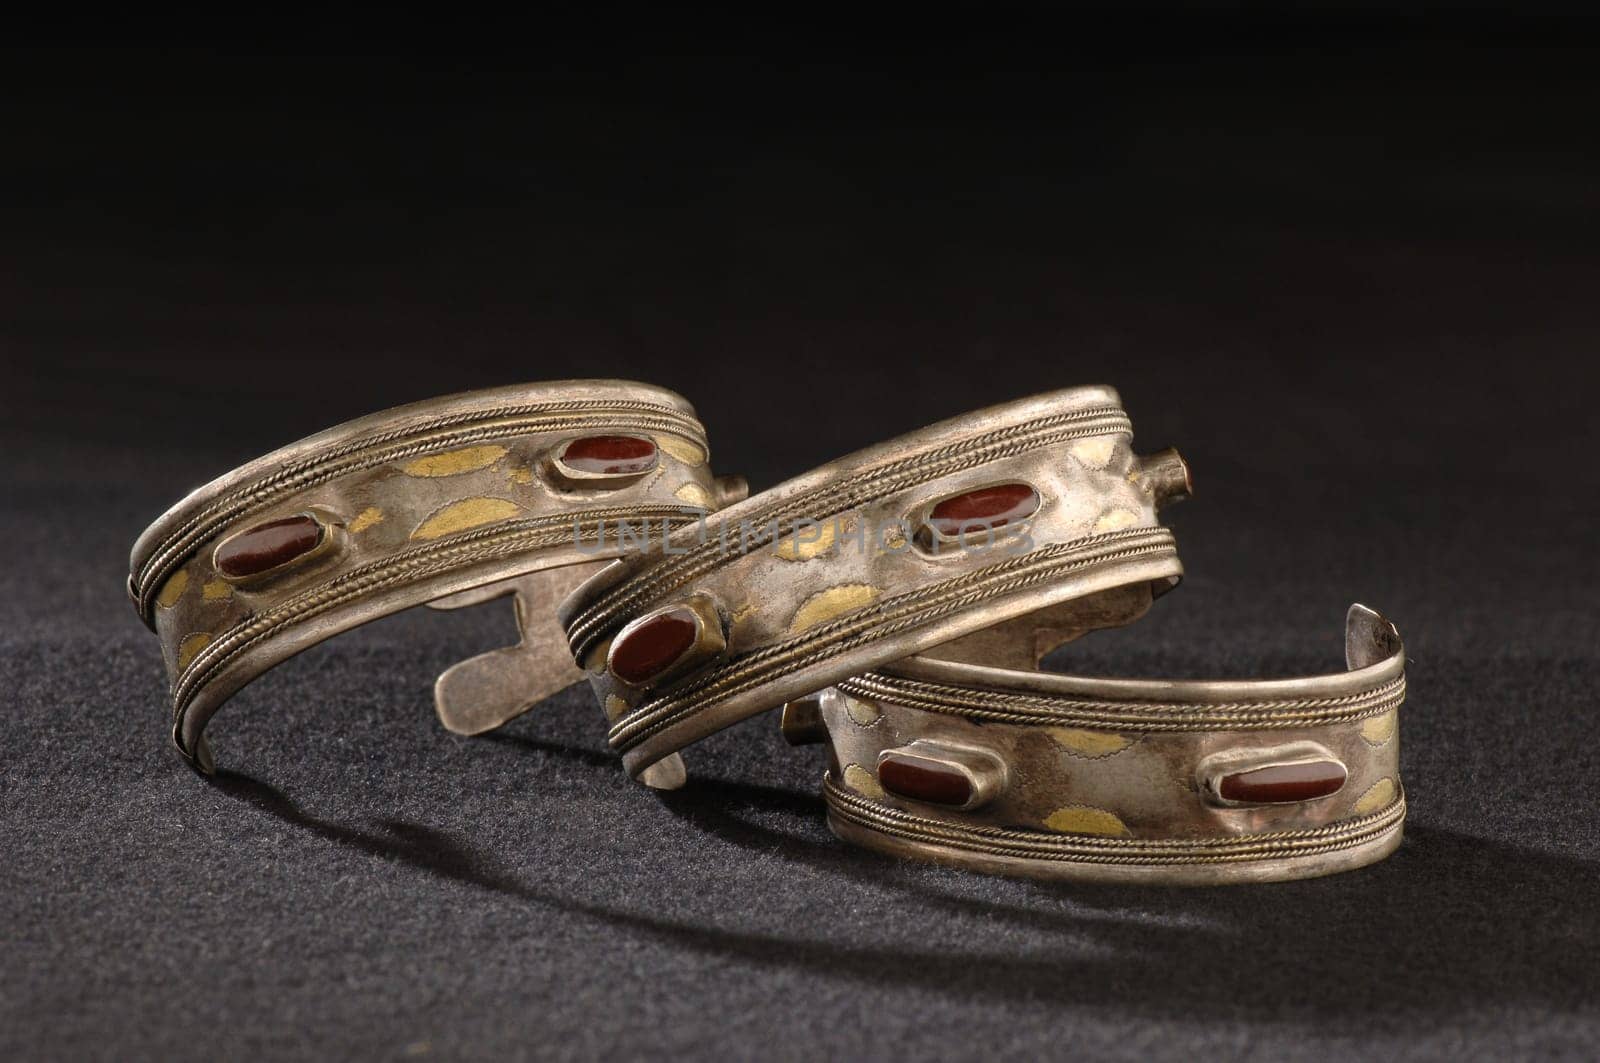 The antique, elegant bracelets with engraving and precious red stones isolated on a black background by A_Karim